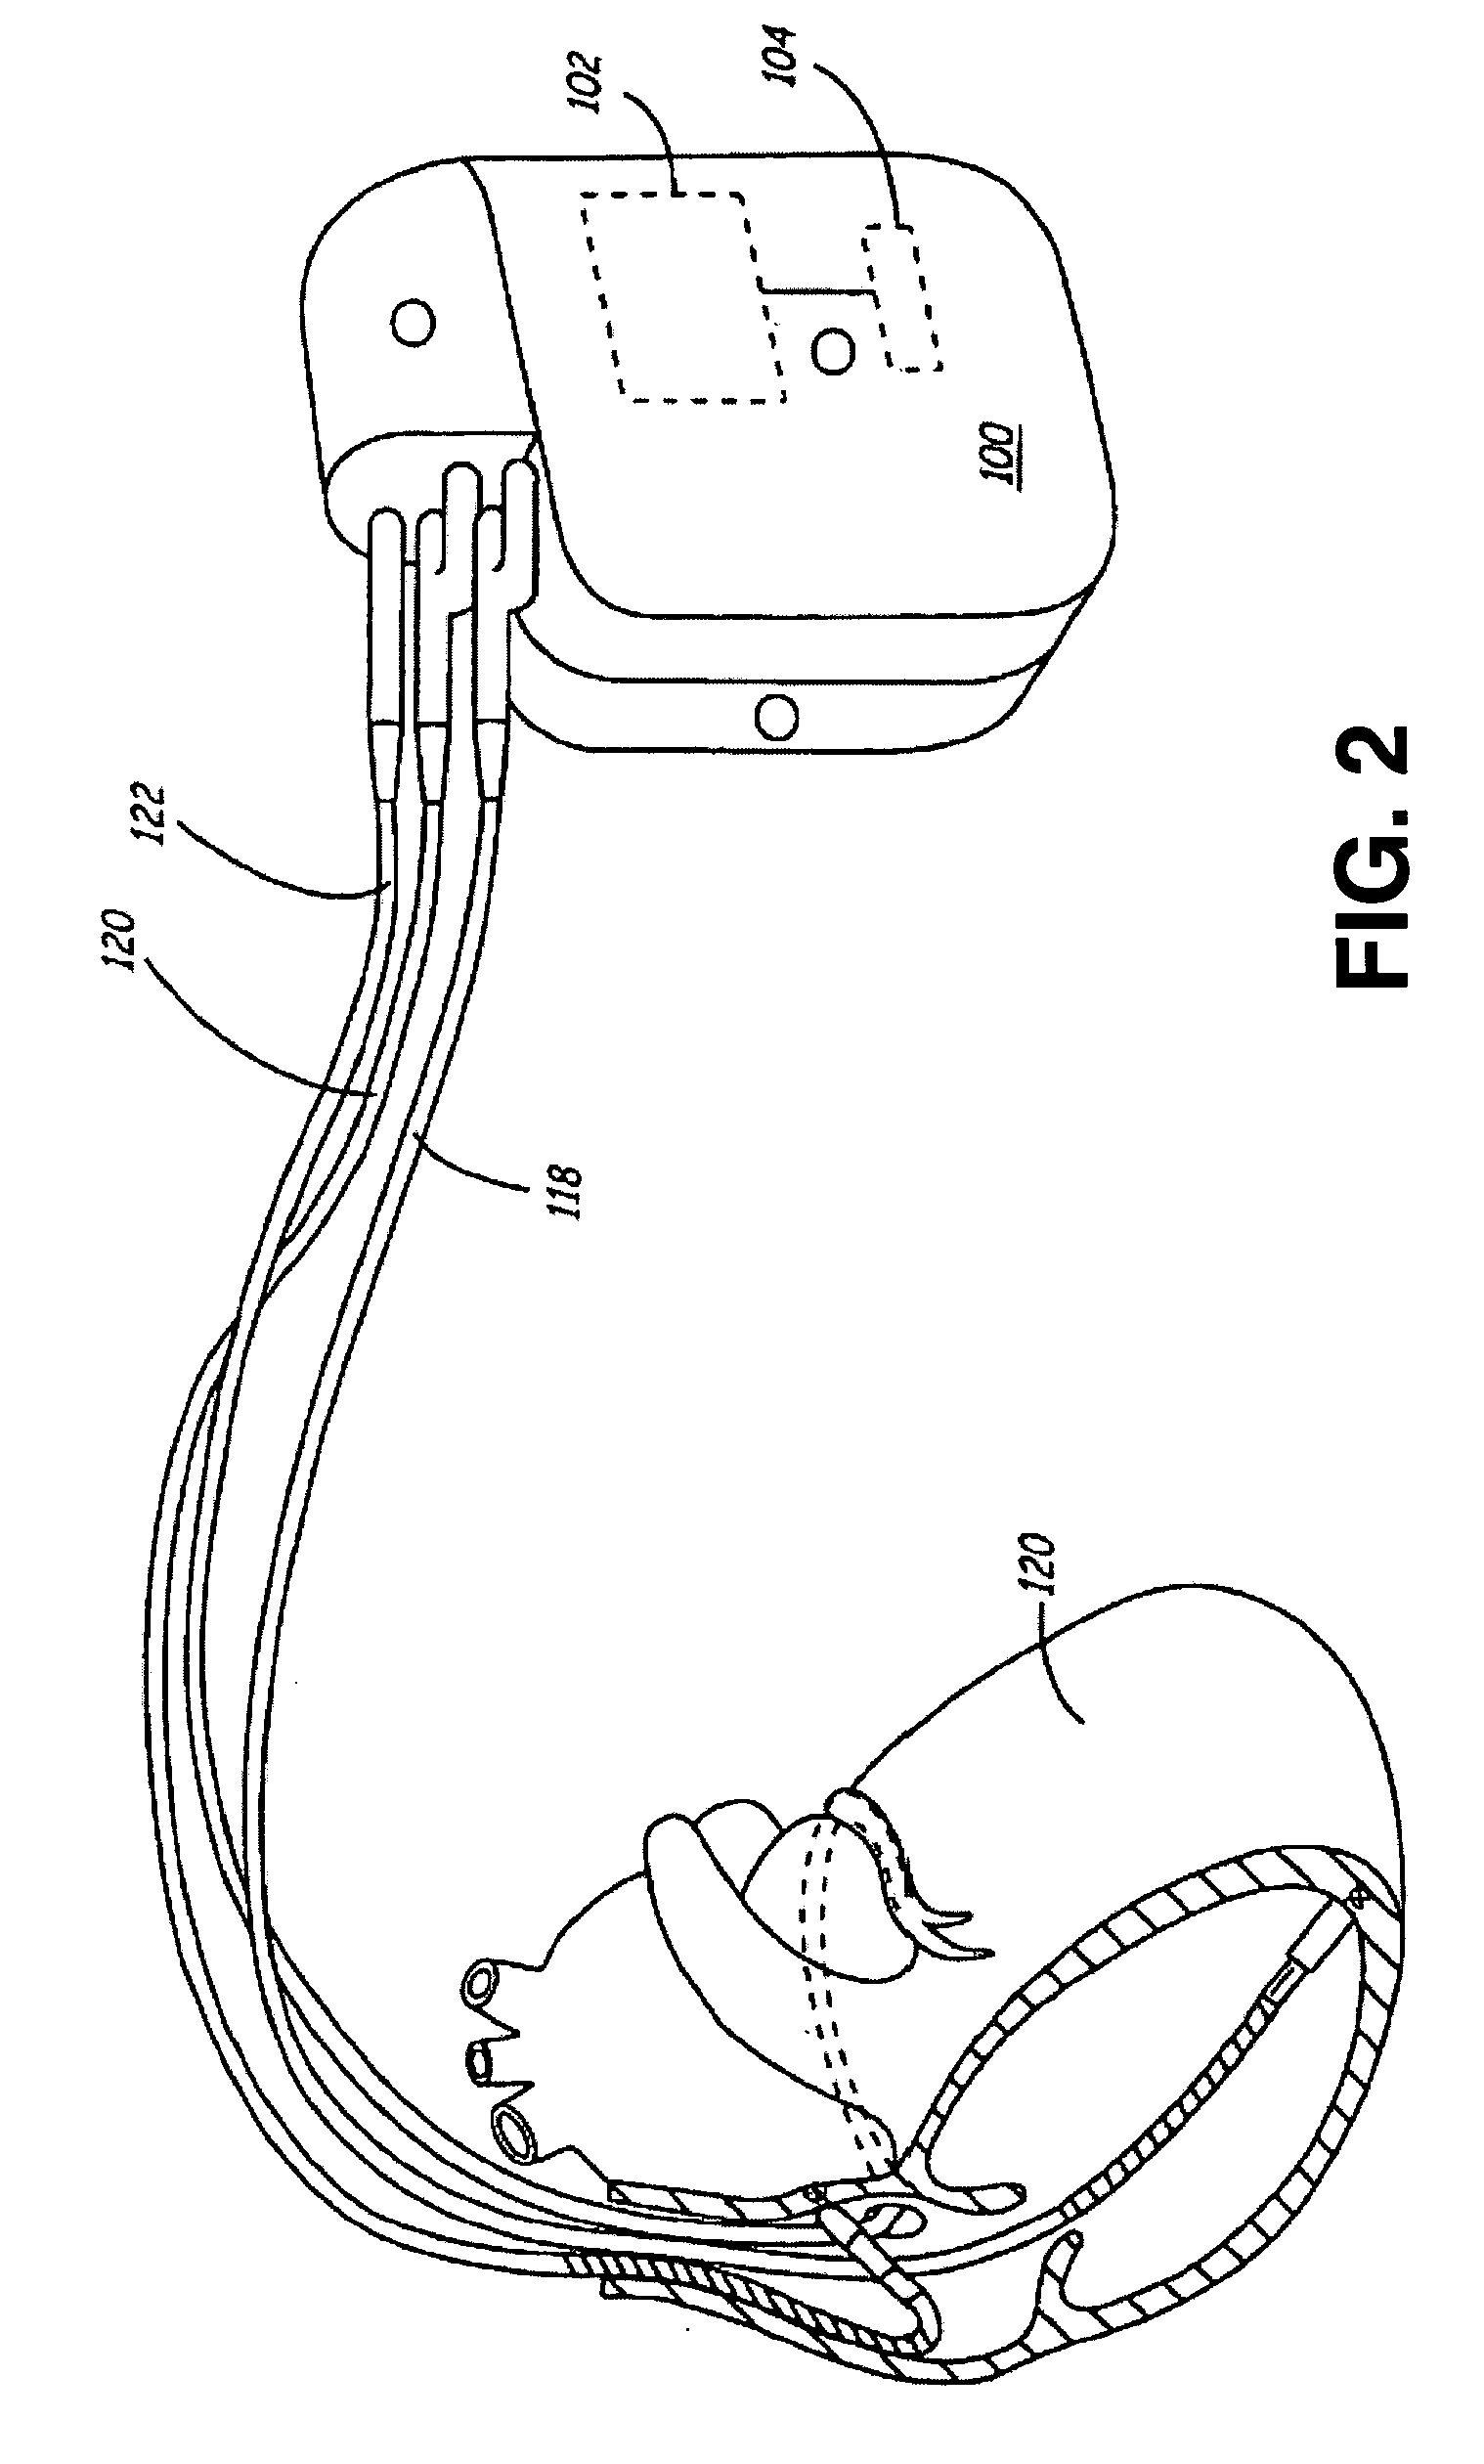 Method and apparatus for muscle function measurement